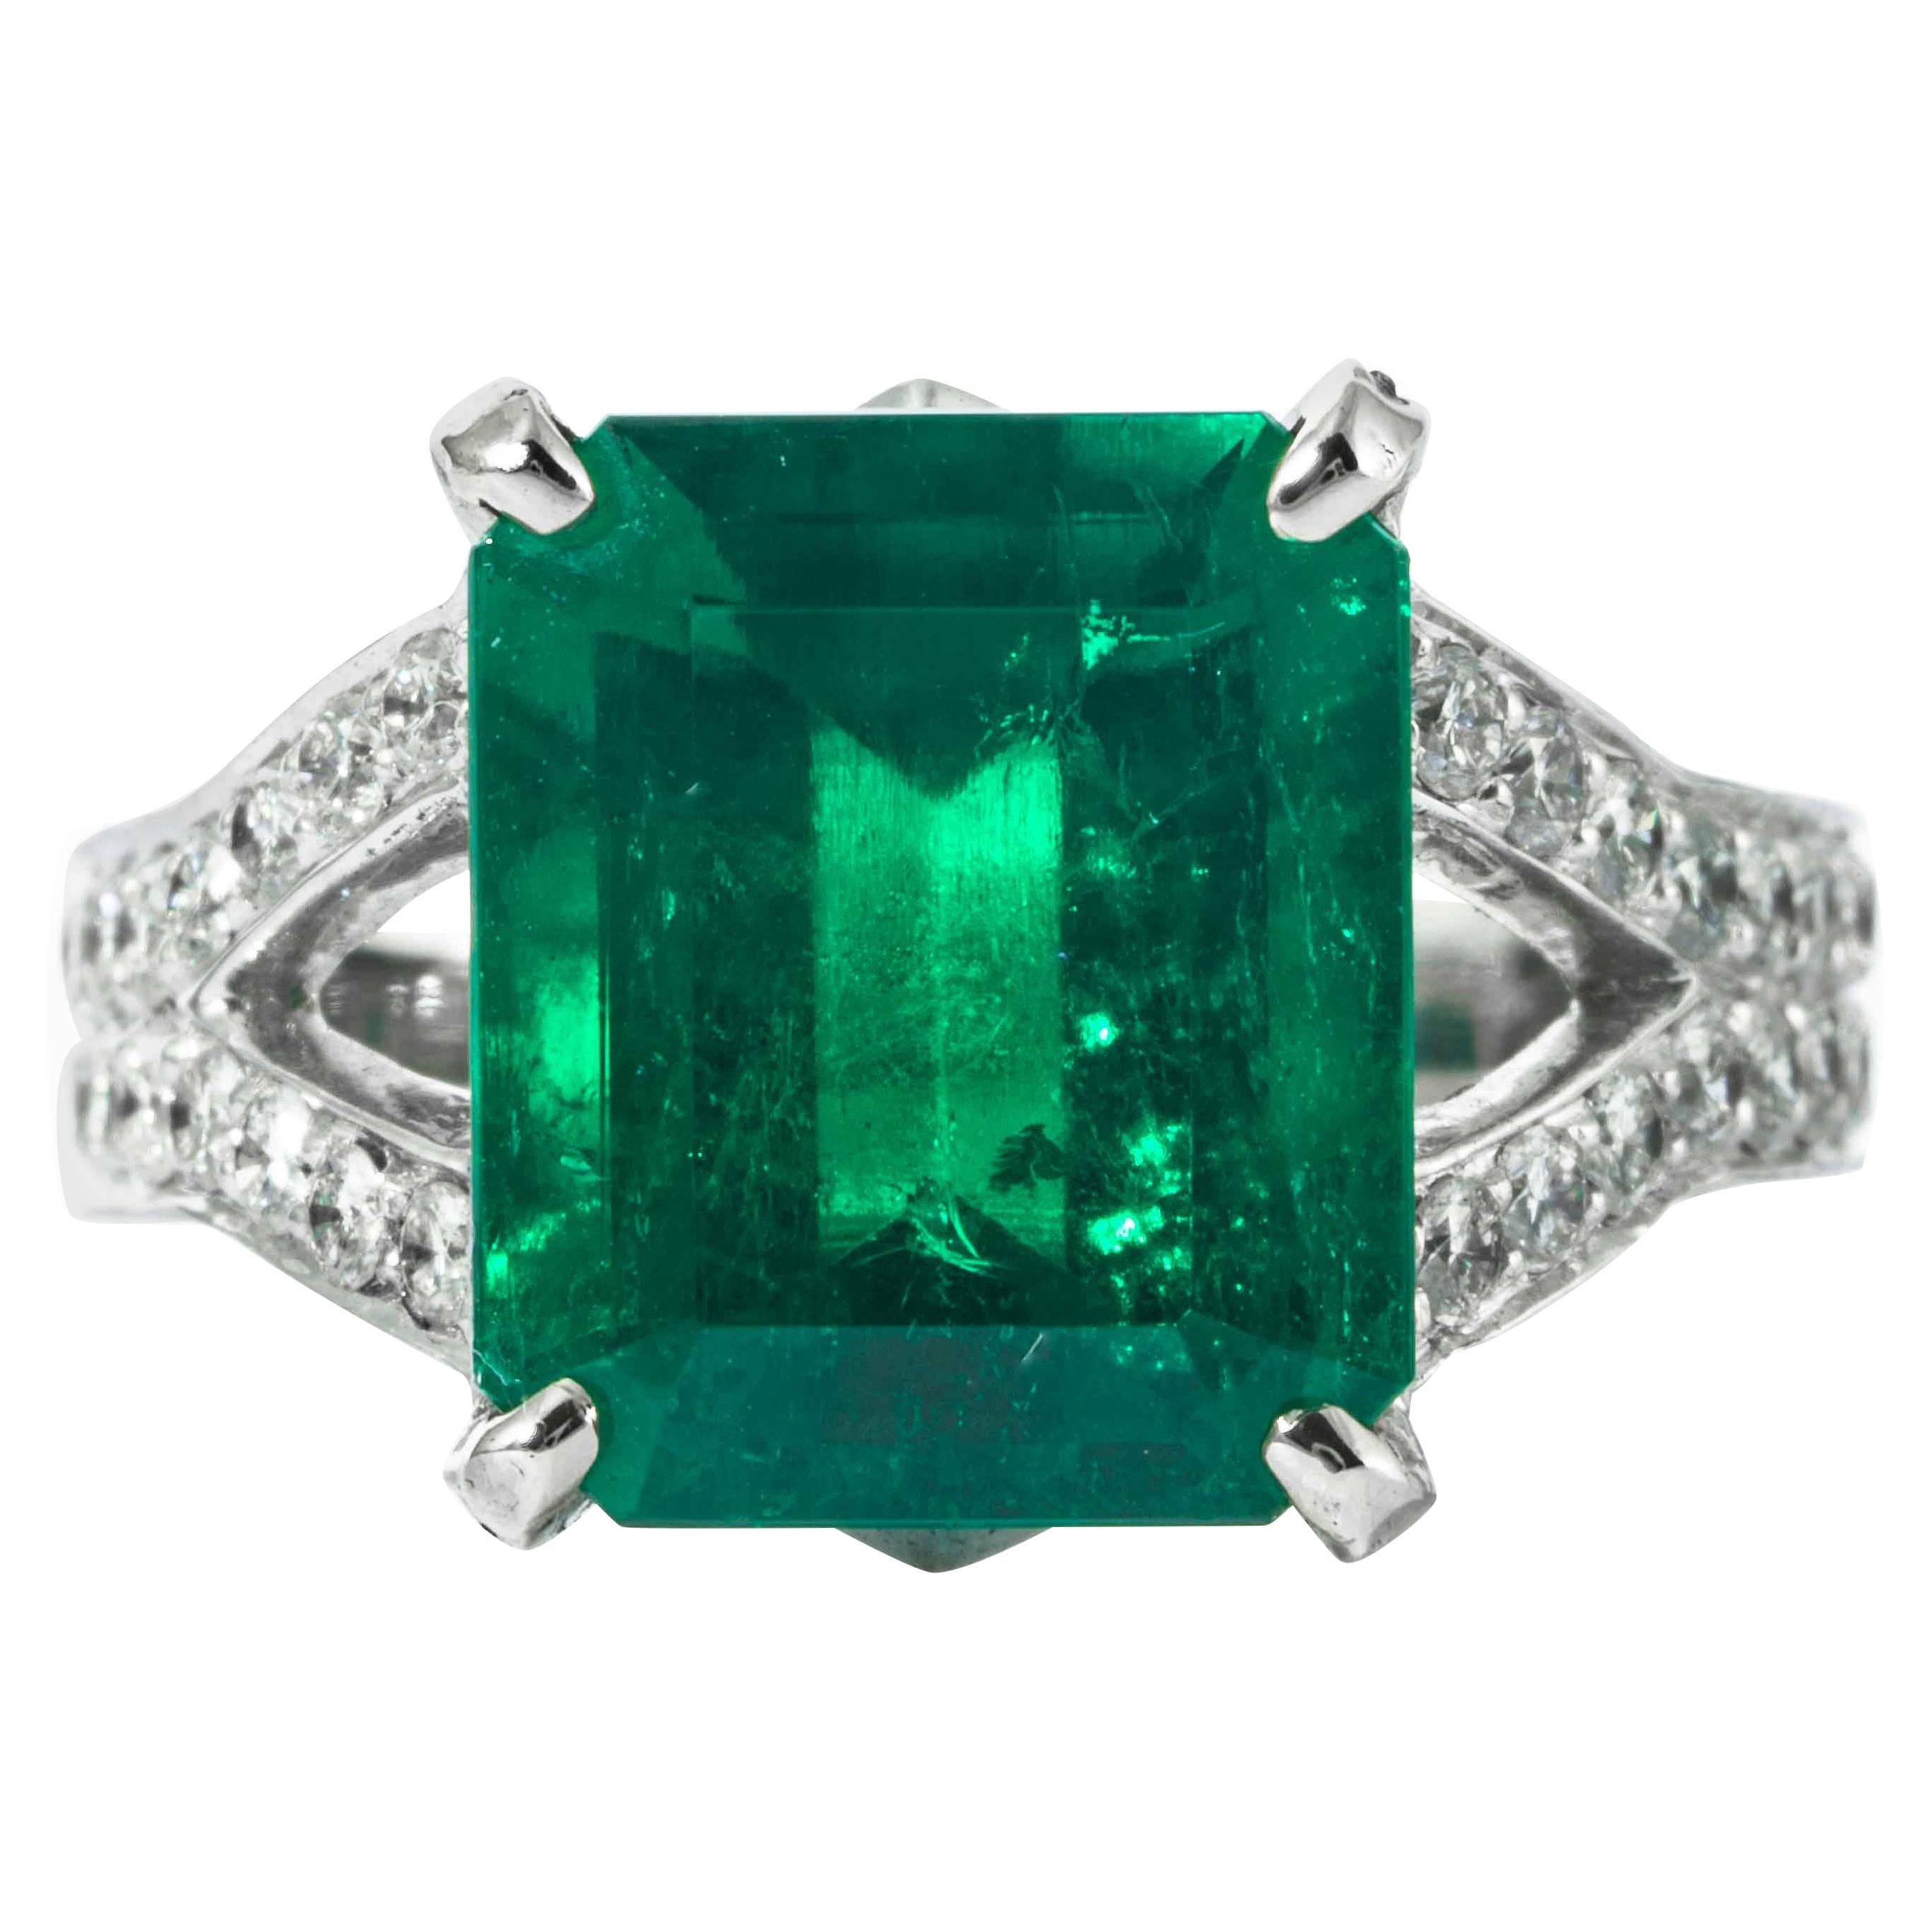 Shreve, Crump & Low 6.25 Carat Colombian Emerald and Diamond White Gold Ring For Sale